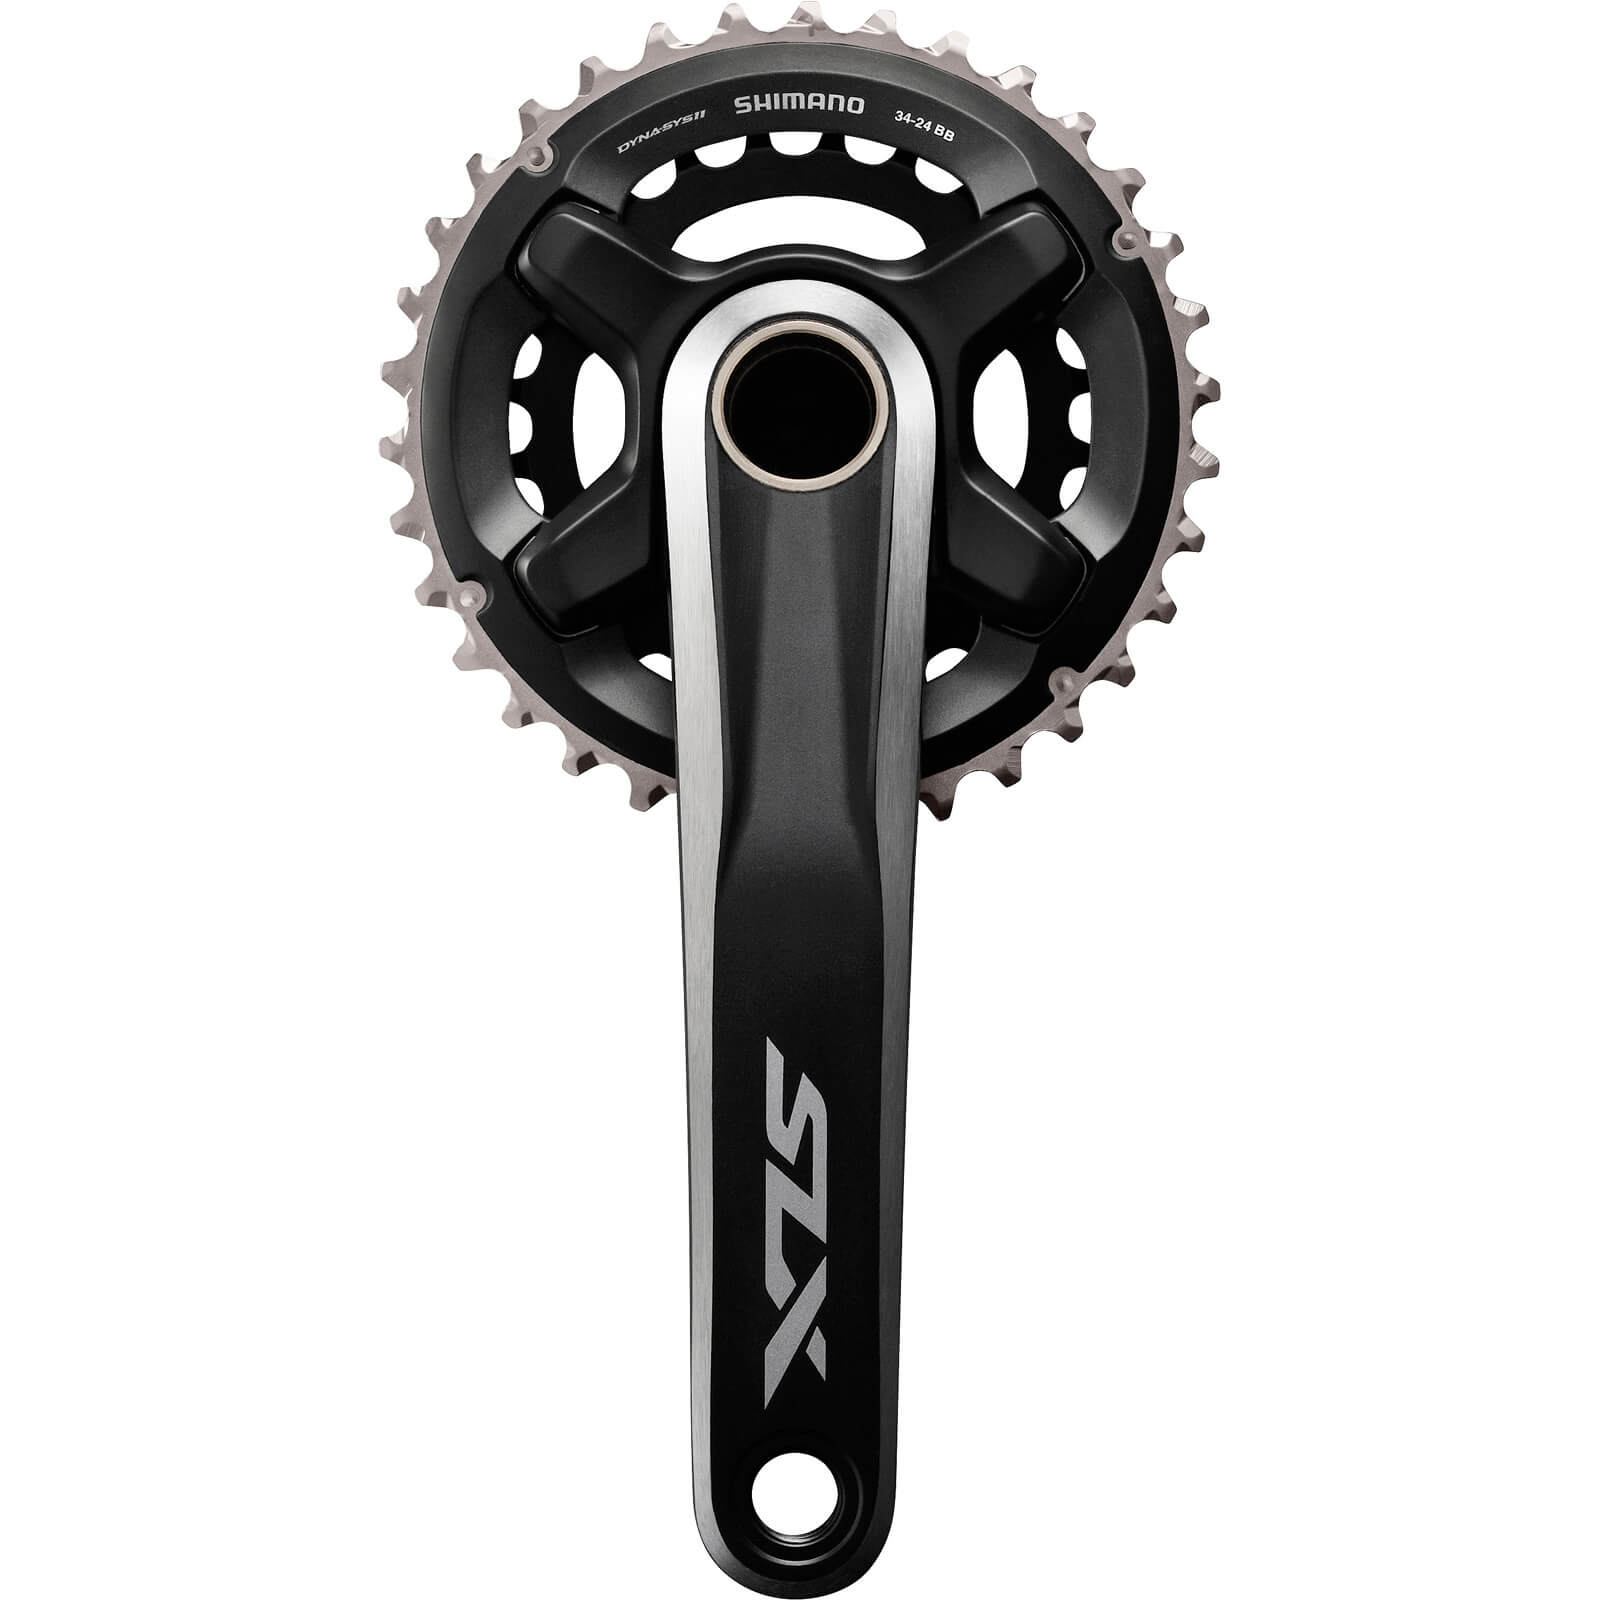 Shimano FC-M7000 SLX Chainset 11-Speed - 34/24T - 170mm - 48.8mm Chainline